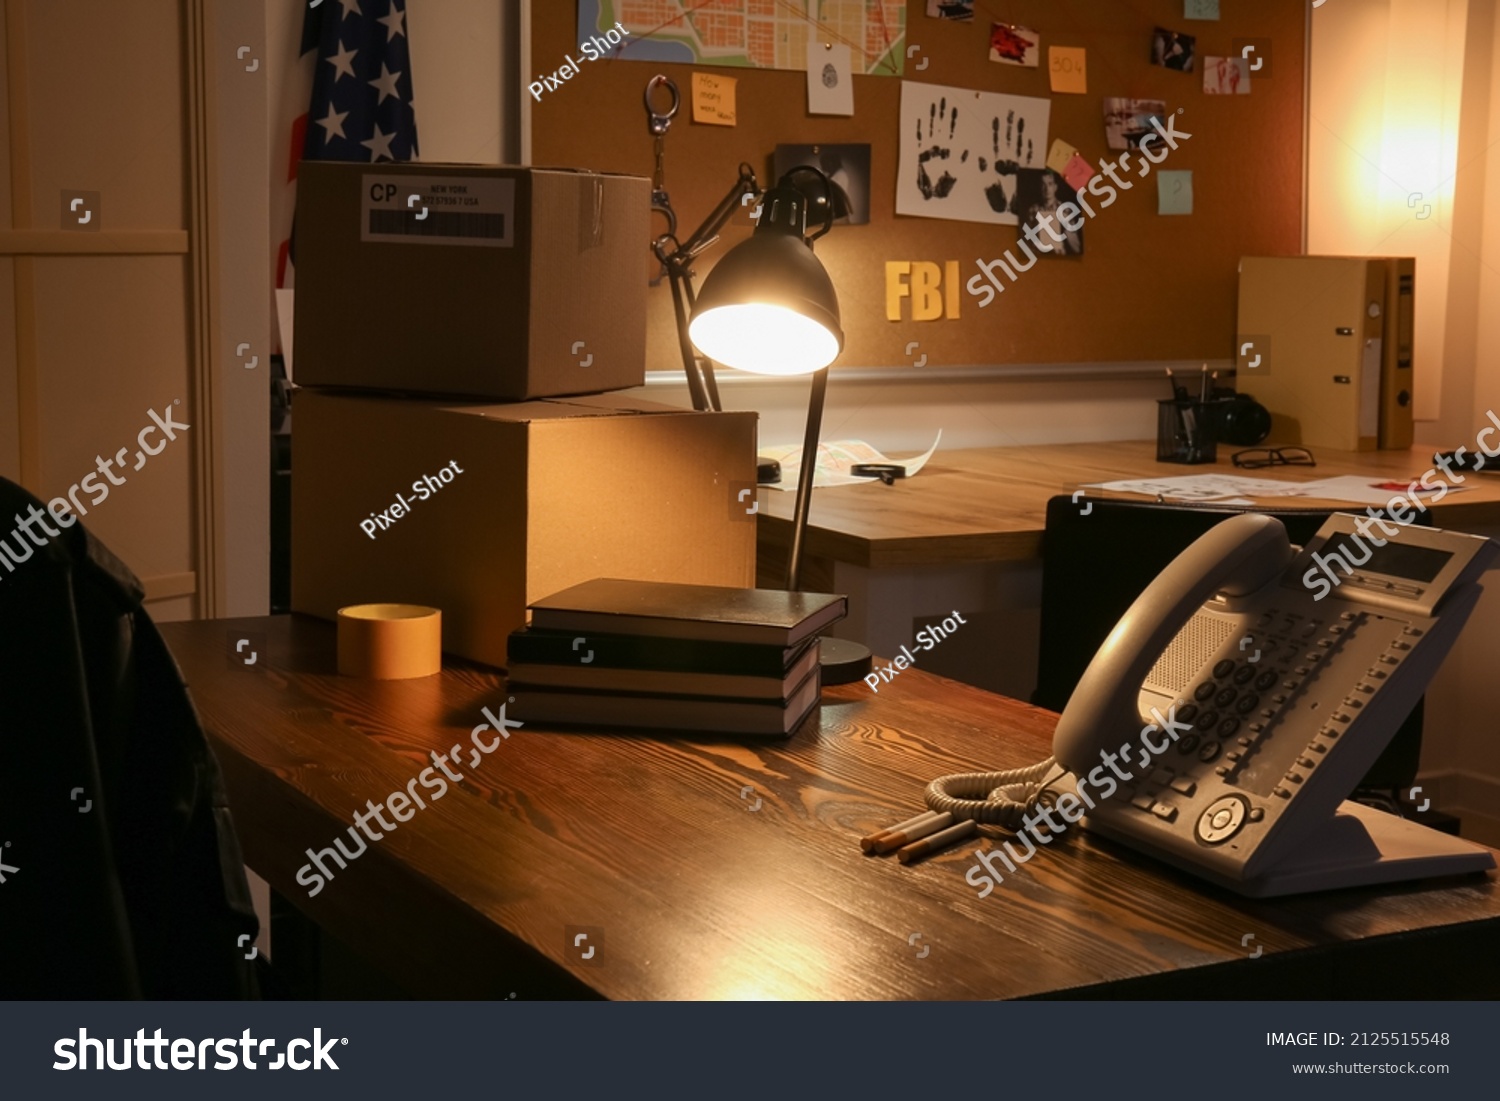 Workplace of FBI agent in office at night #2125515548